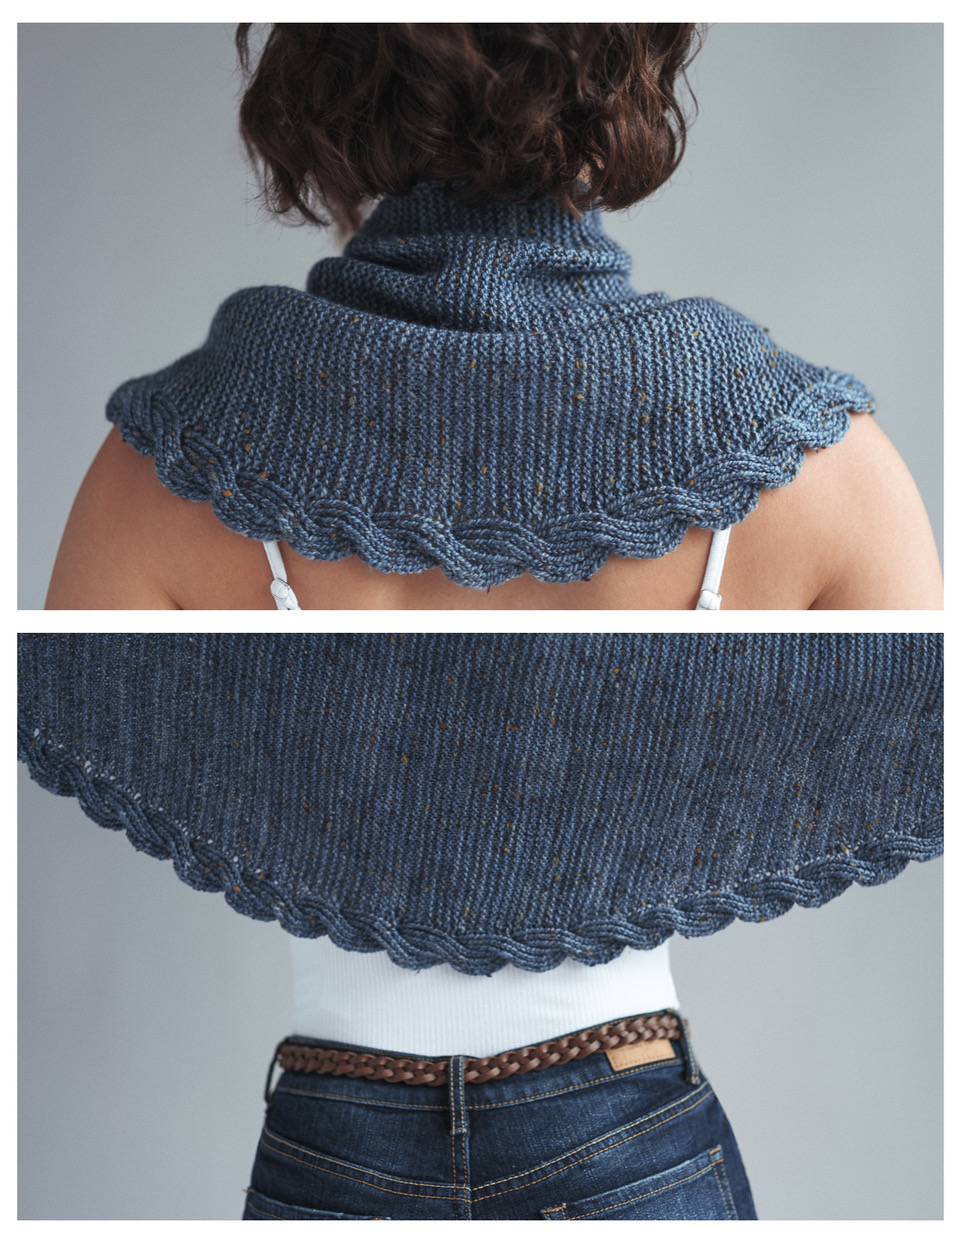 etude no 5 knitted shawl cabled border wrap pattern